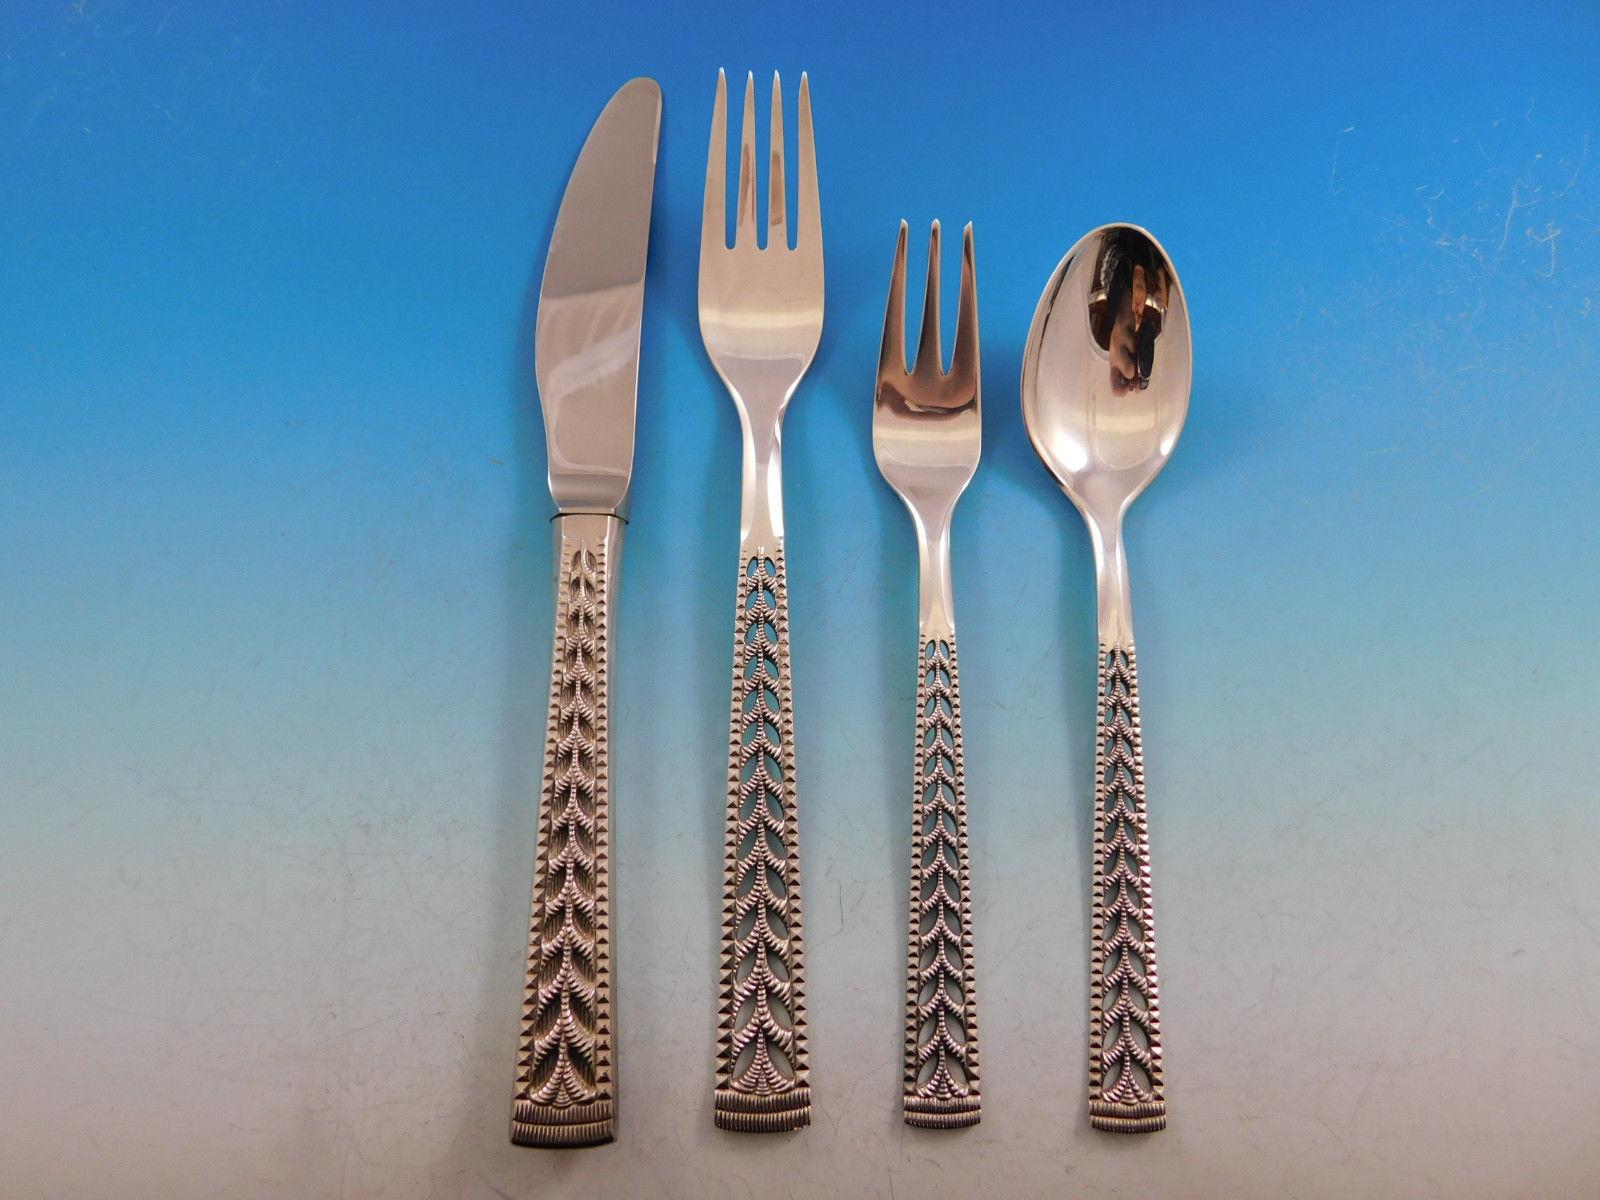 Juvel by Nils Hansen Norway Norwegian 830 silver Flatware set with unique pierced handle, 48 pieces. This set includes:

8 Knives, 8